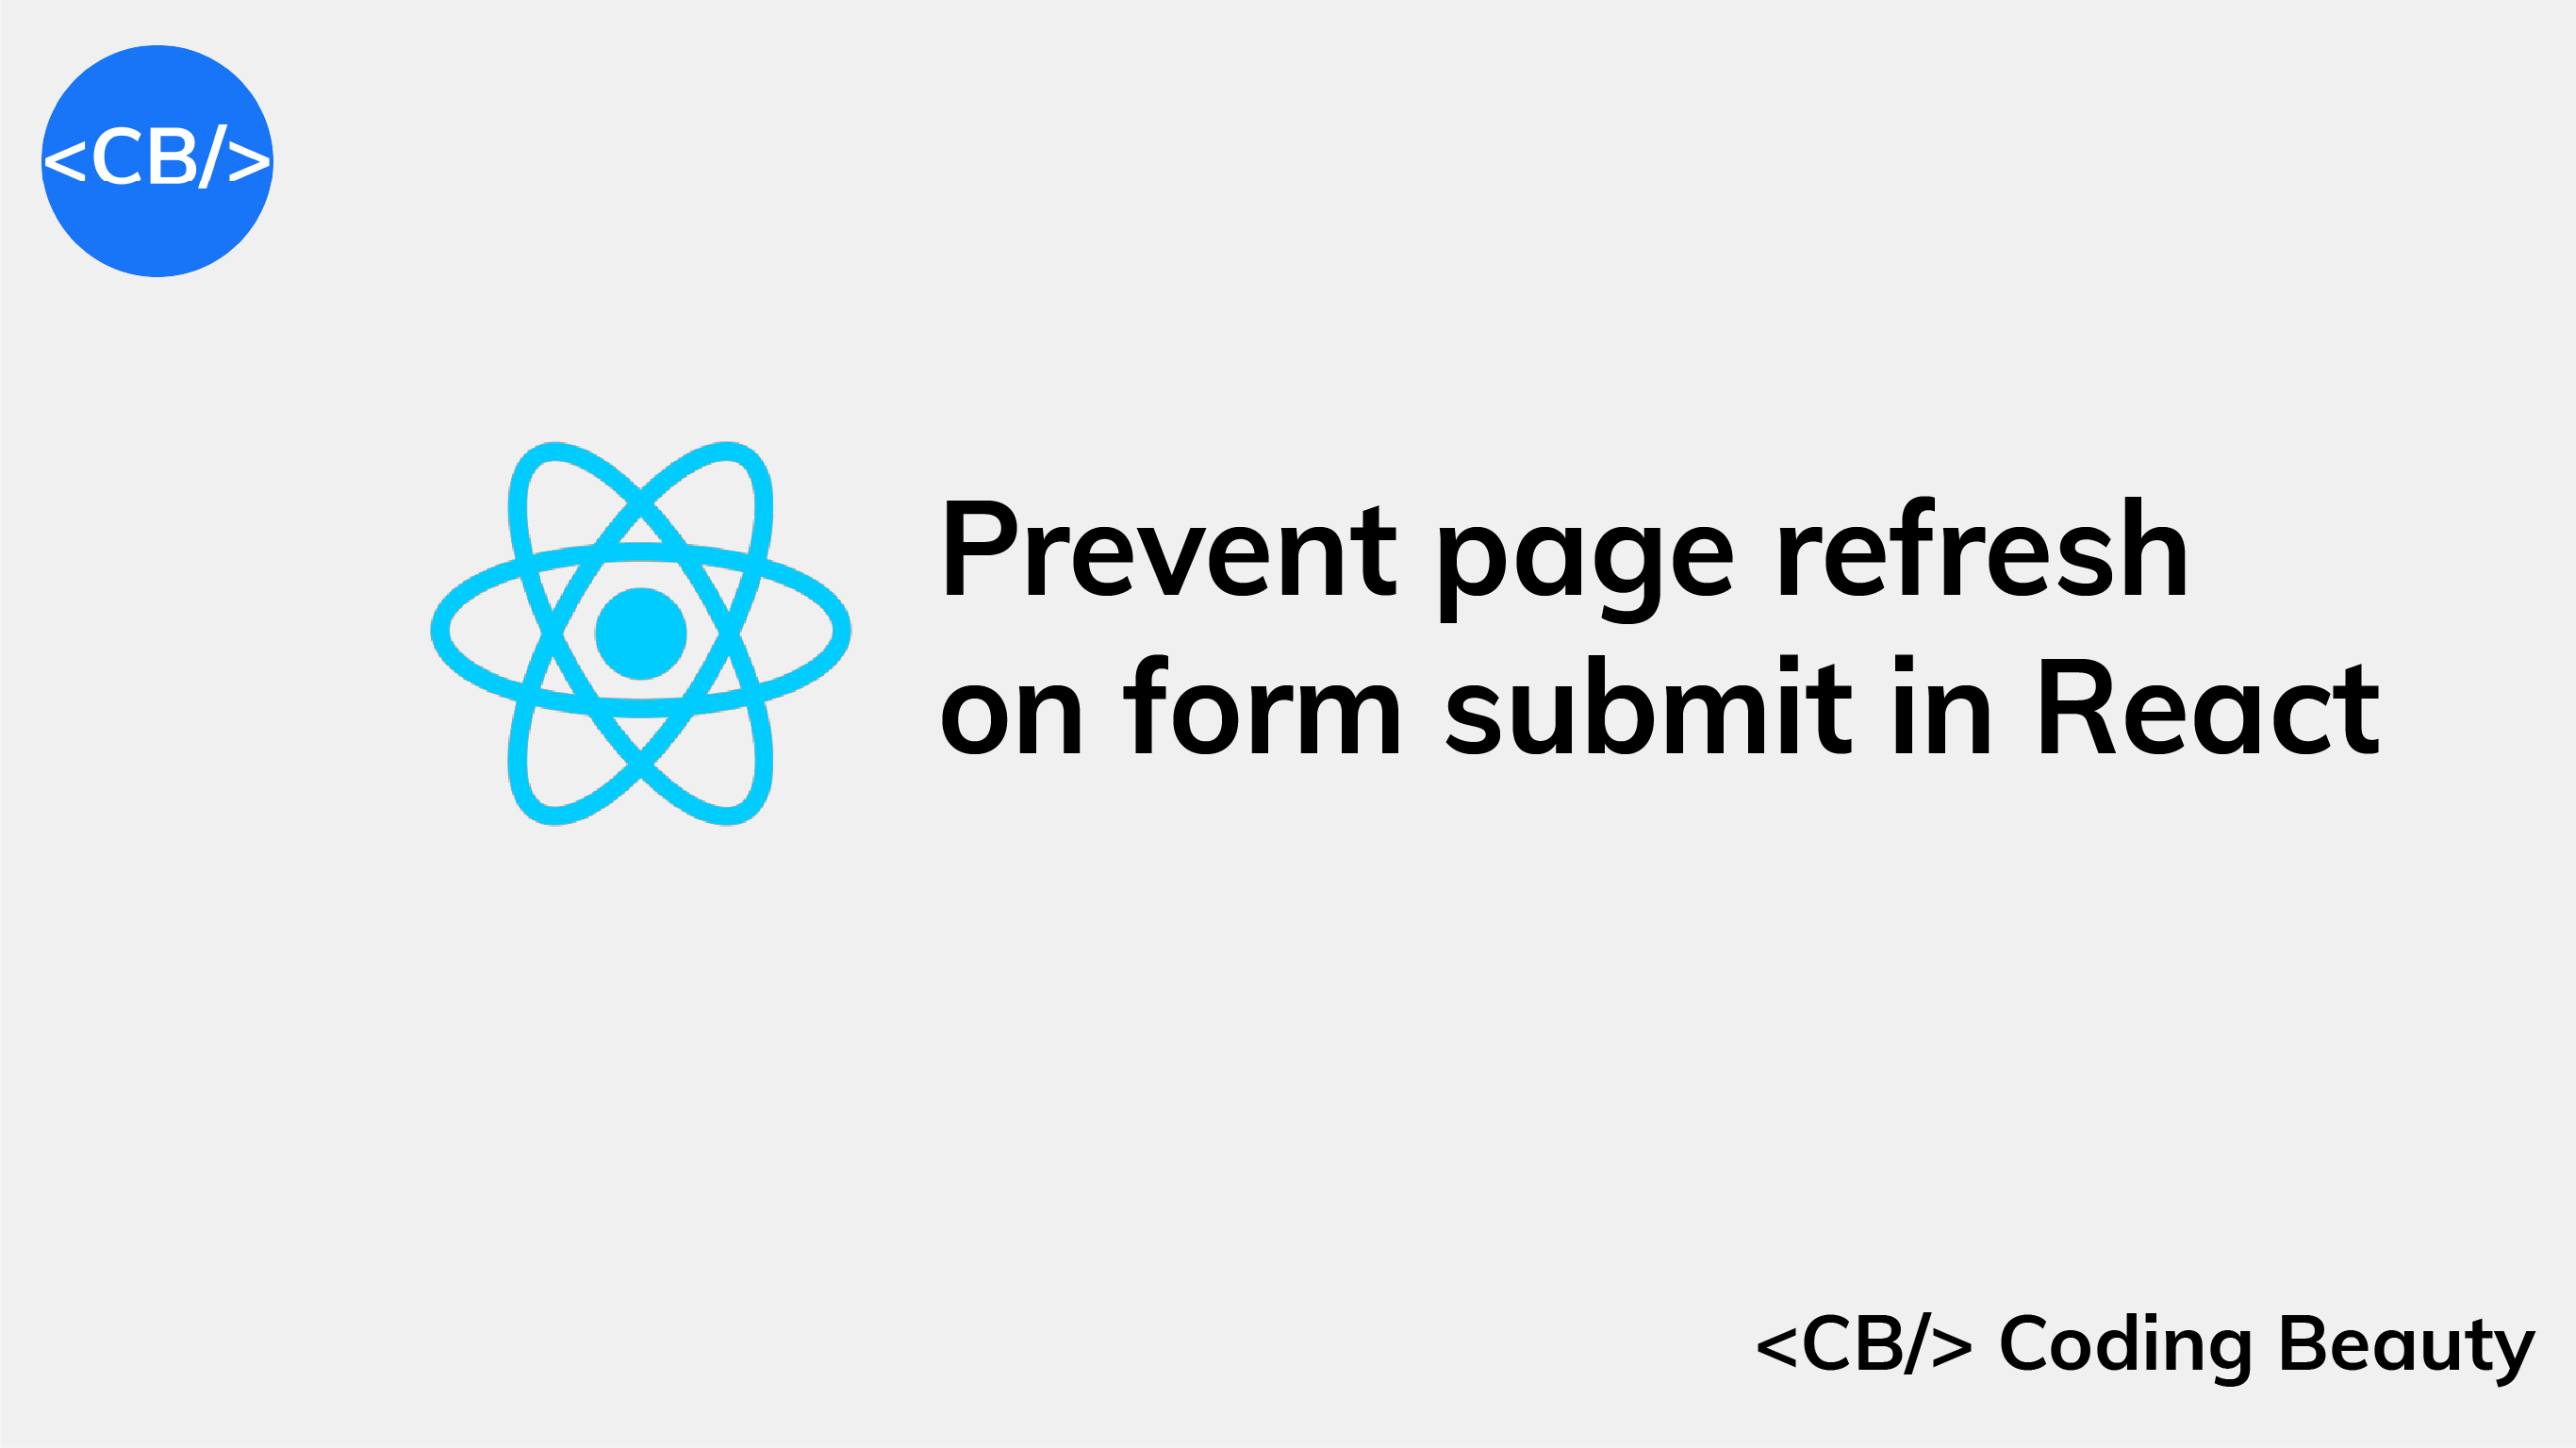 How to prevent page refresh on form submit in React